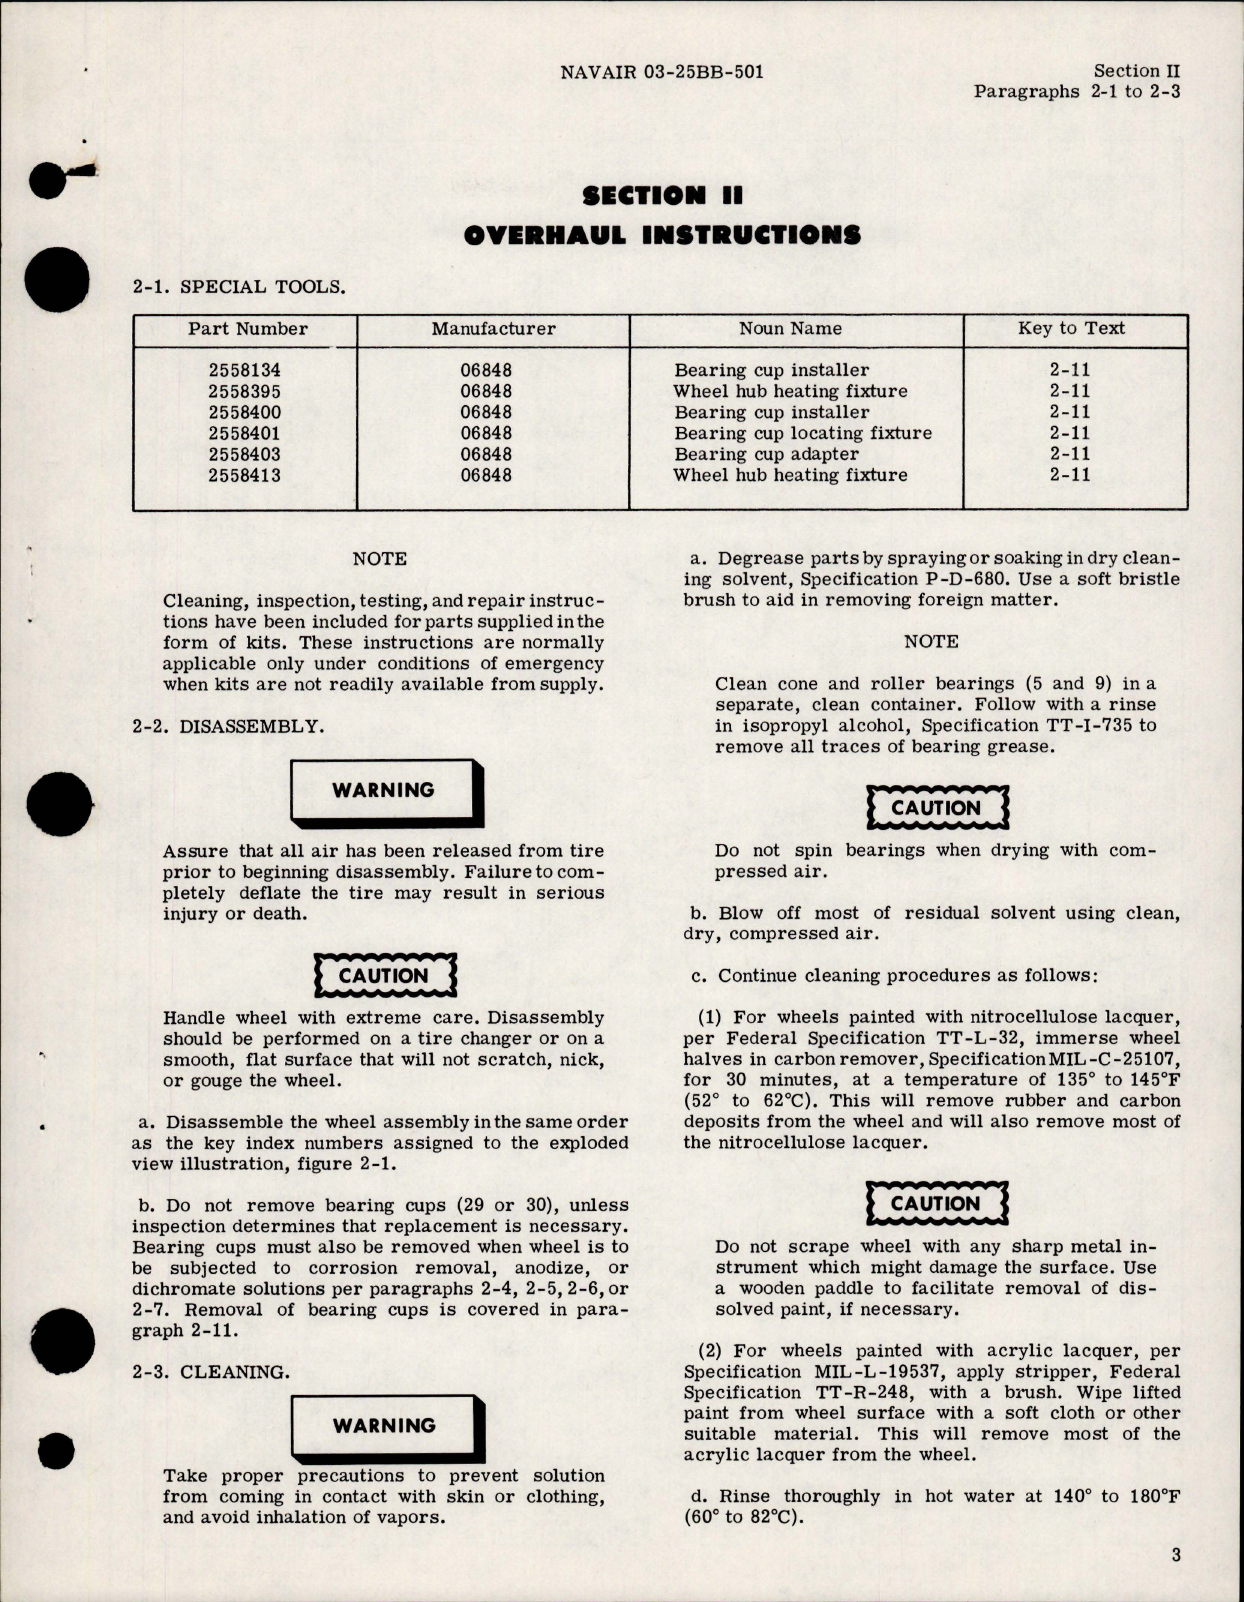 Sample page 7 from AirCorps Library document: Overhaul Instructions for Main Wheel, Nose Wheel and Tail Wheel 